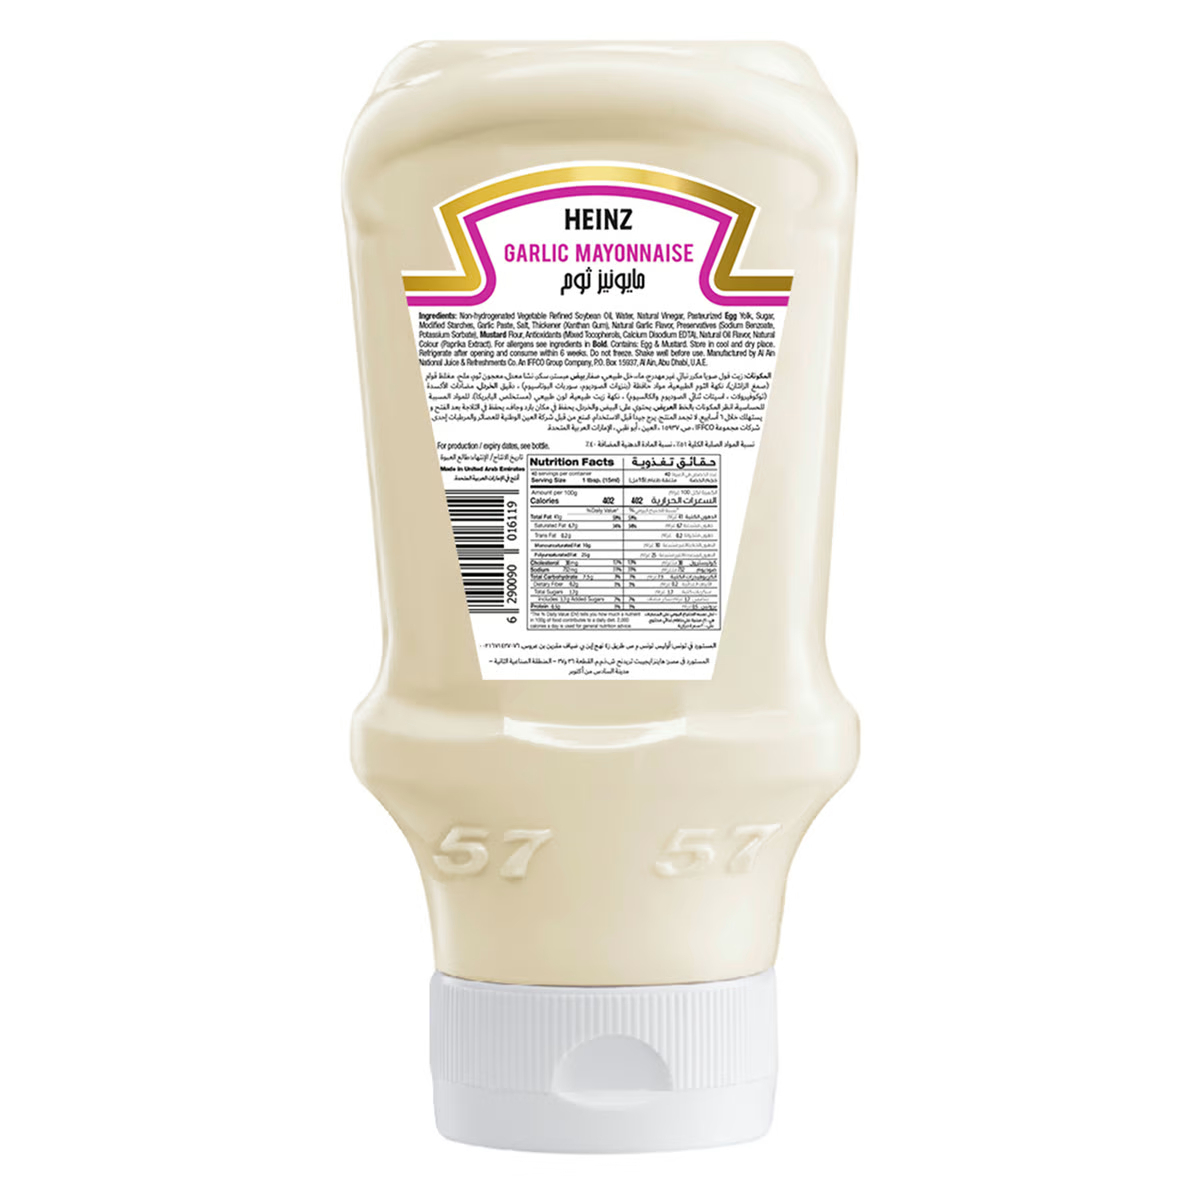 Heinz Garlic Mayonnaise Top Down Squeezy Bottle Value Pack 600 ml